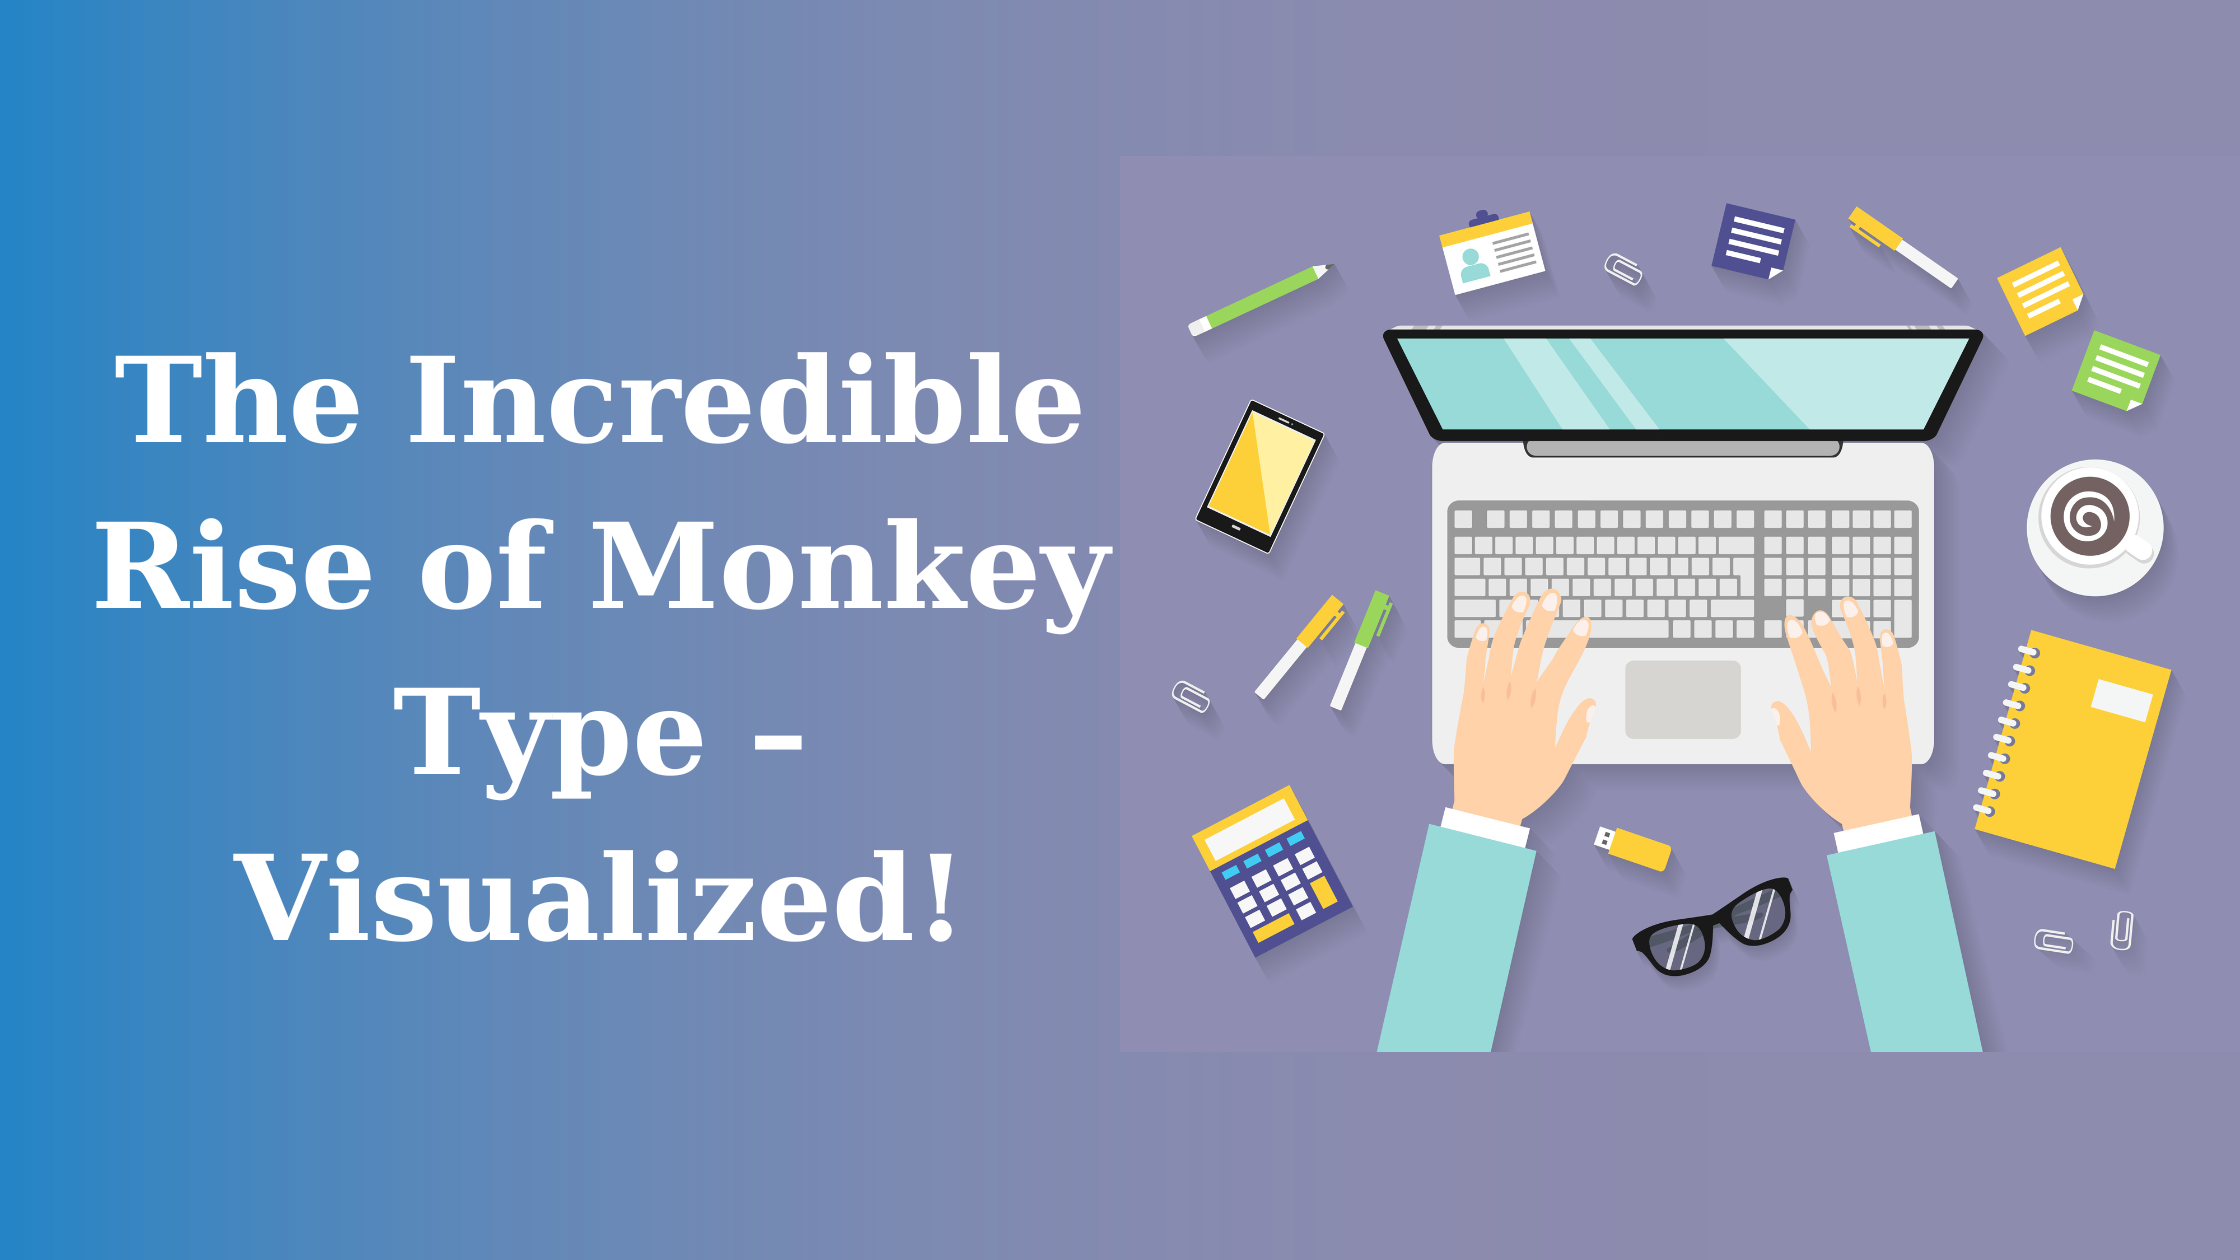 The Incredible Rise of Monkey Type – Visualized!